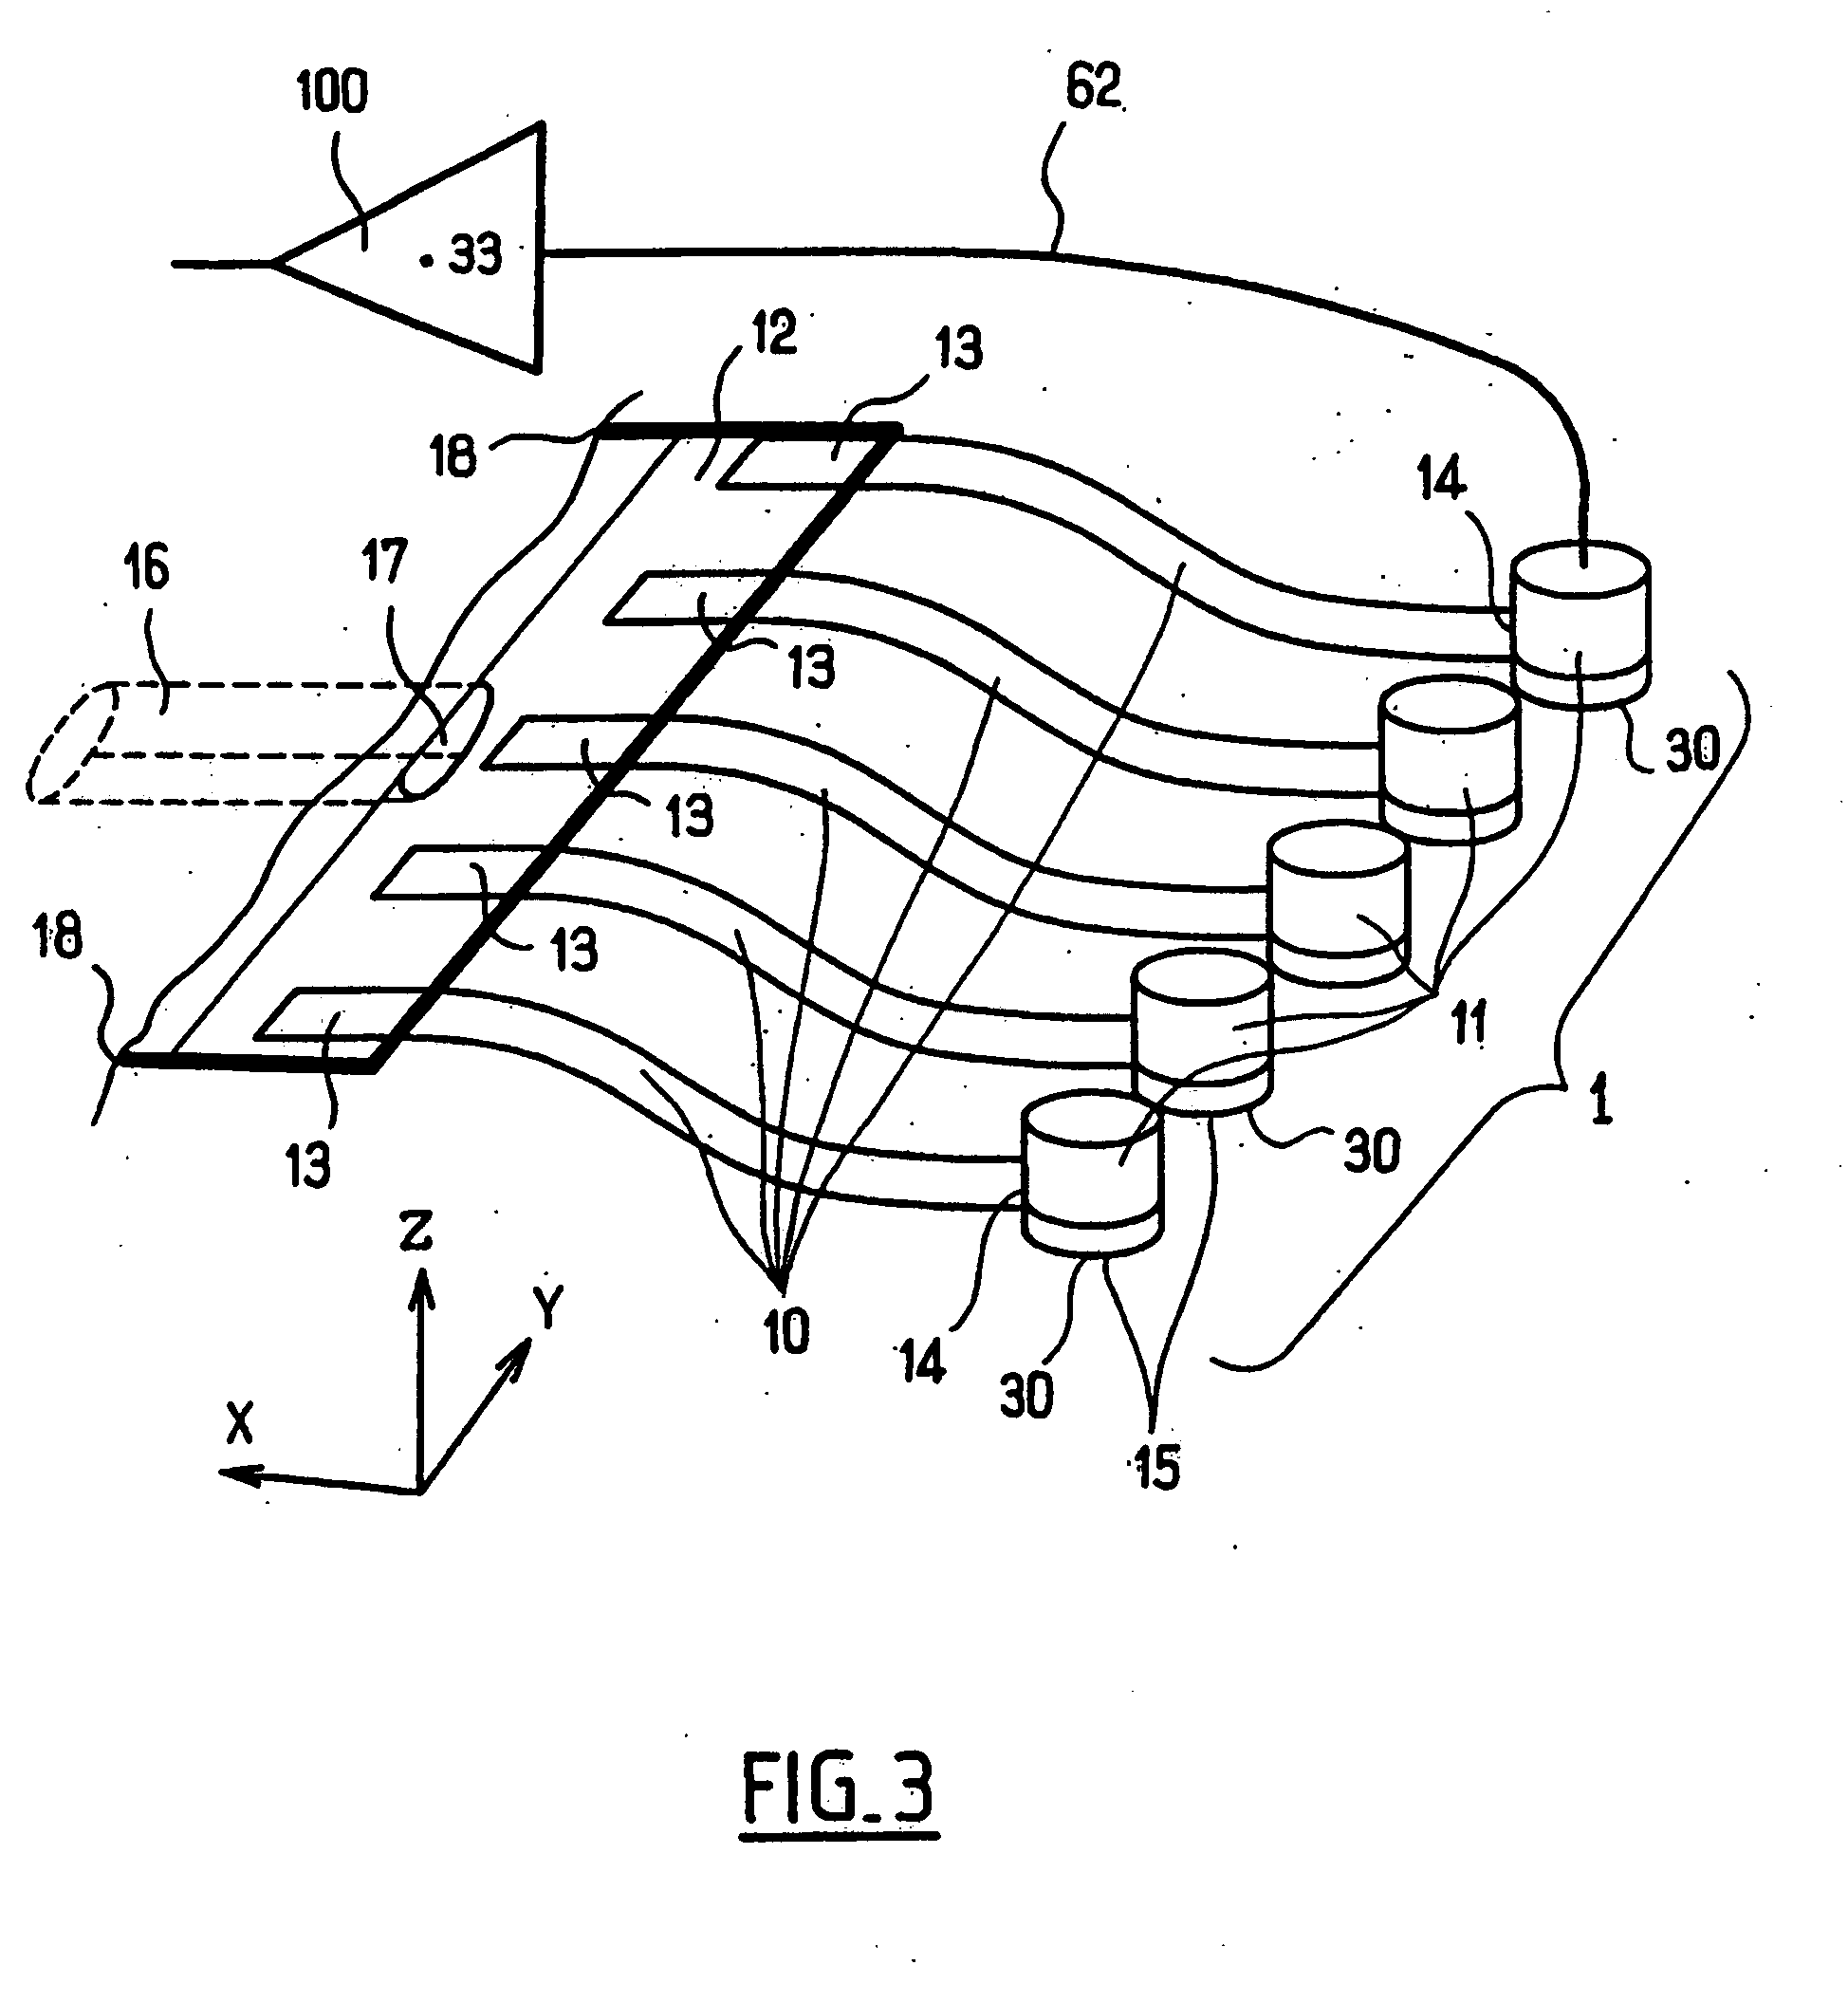 Tool, Sensor, and Device for a Wall Non-Distructive Control